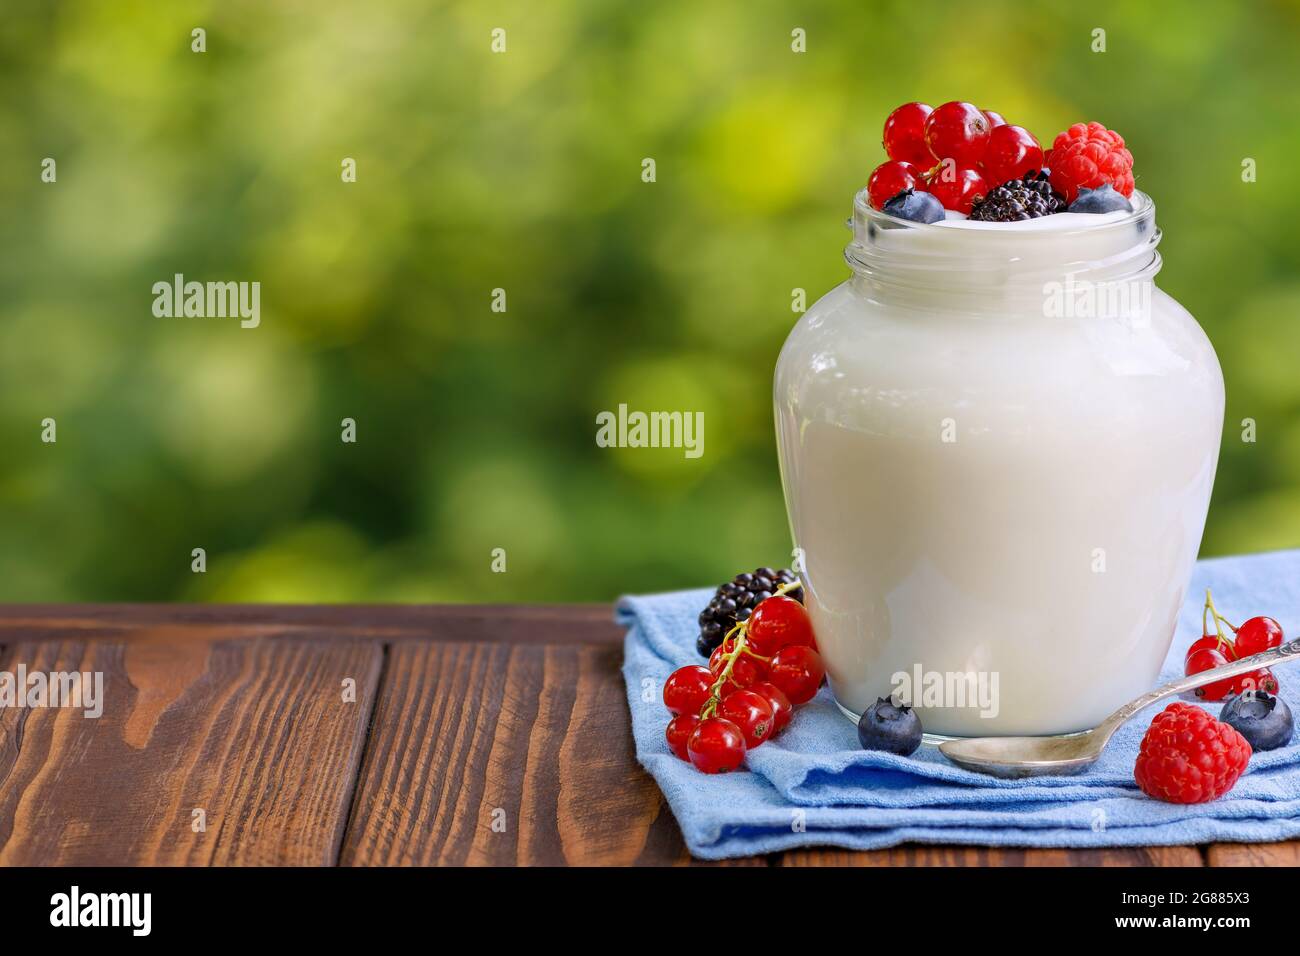 yogurt with fresh berries in glass jar on wooden table outdoors Stock Photo